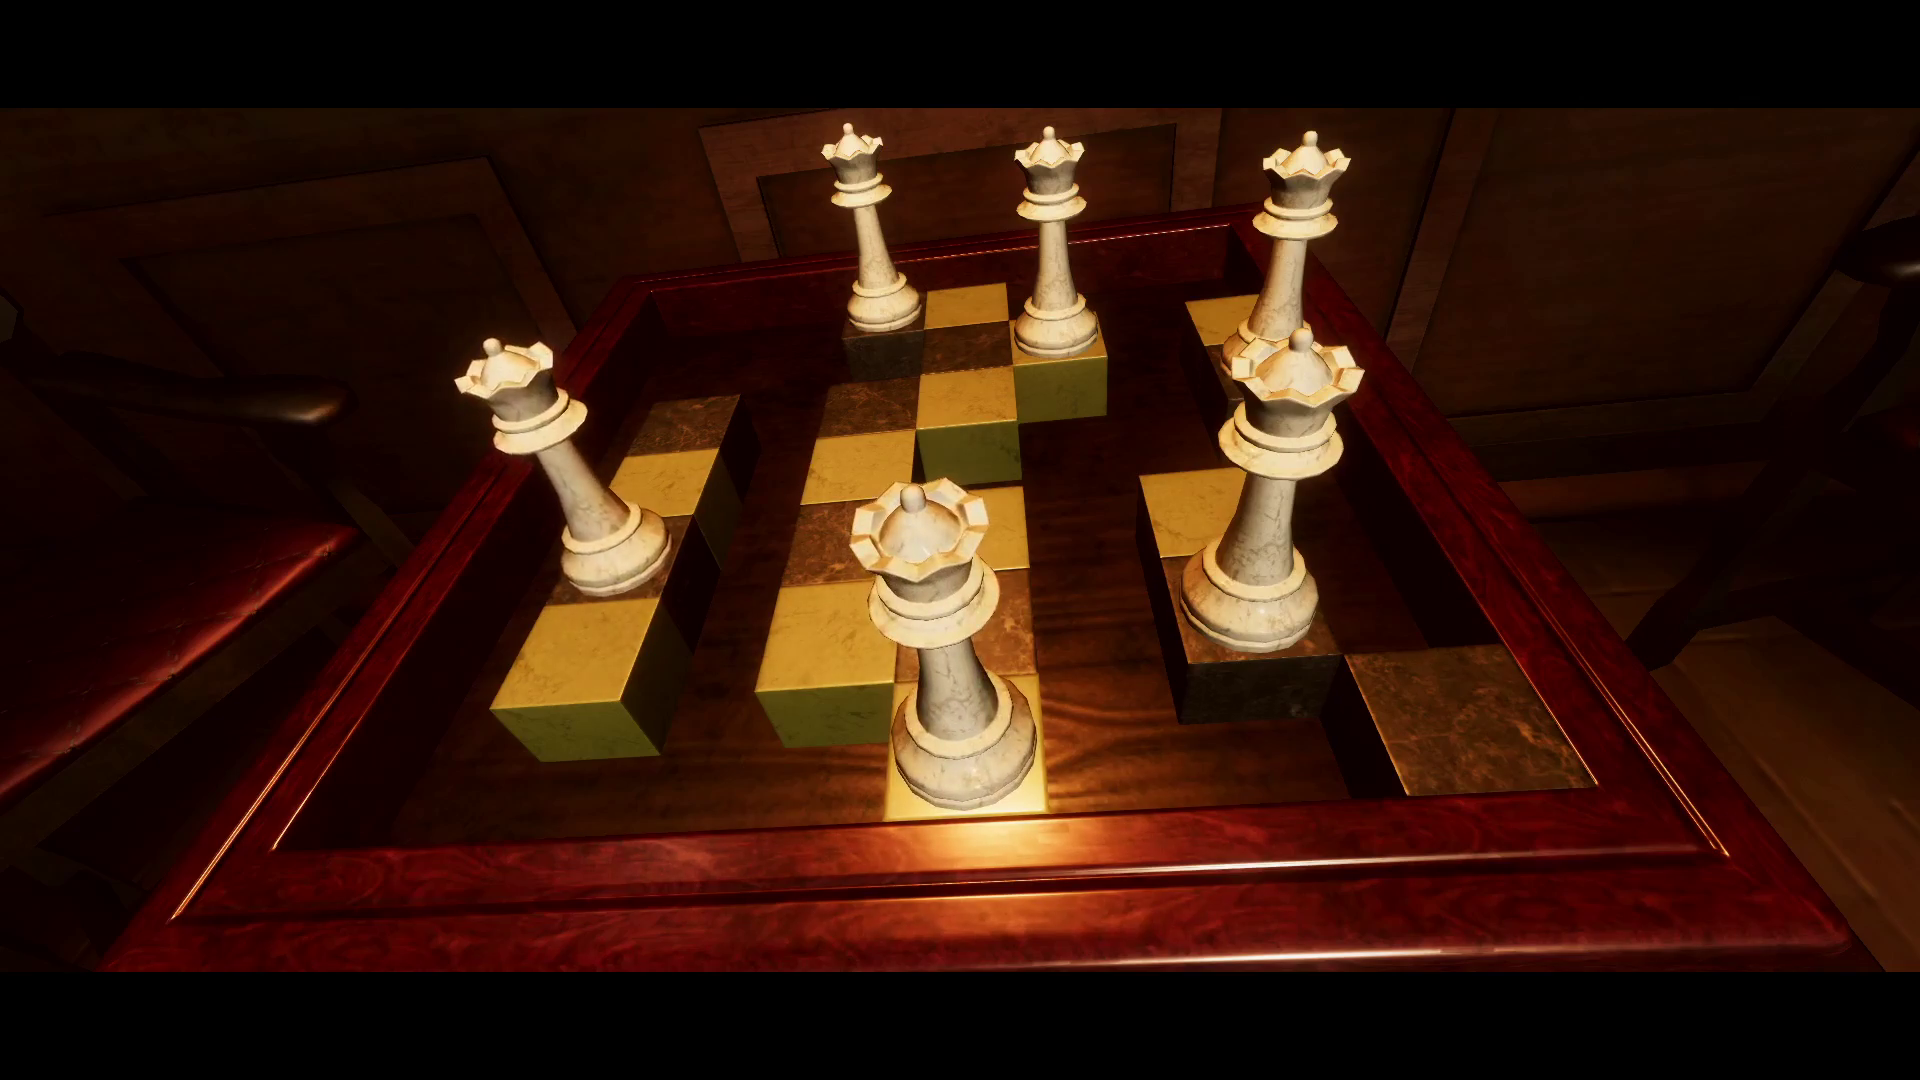 Chess Ultra Review – Switch – Game Chronicles